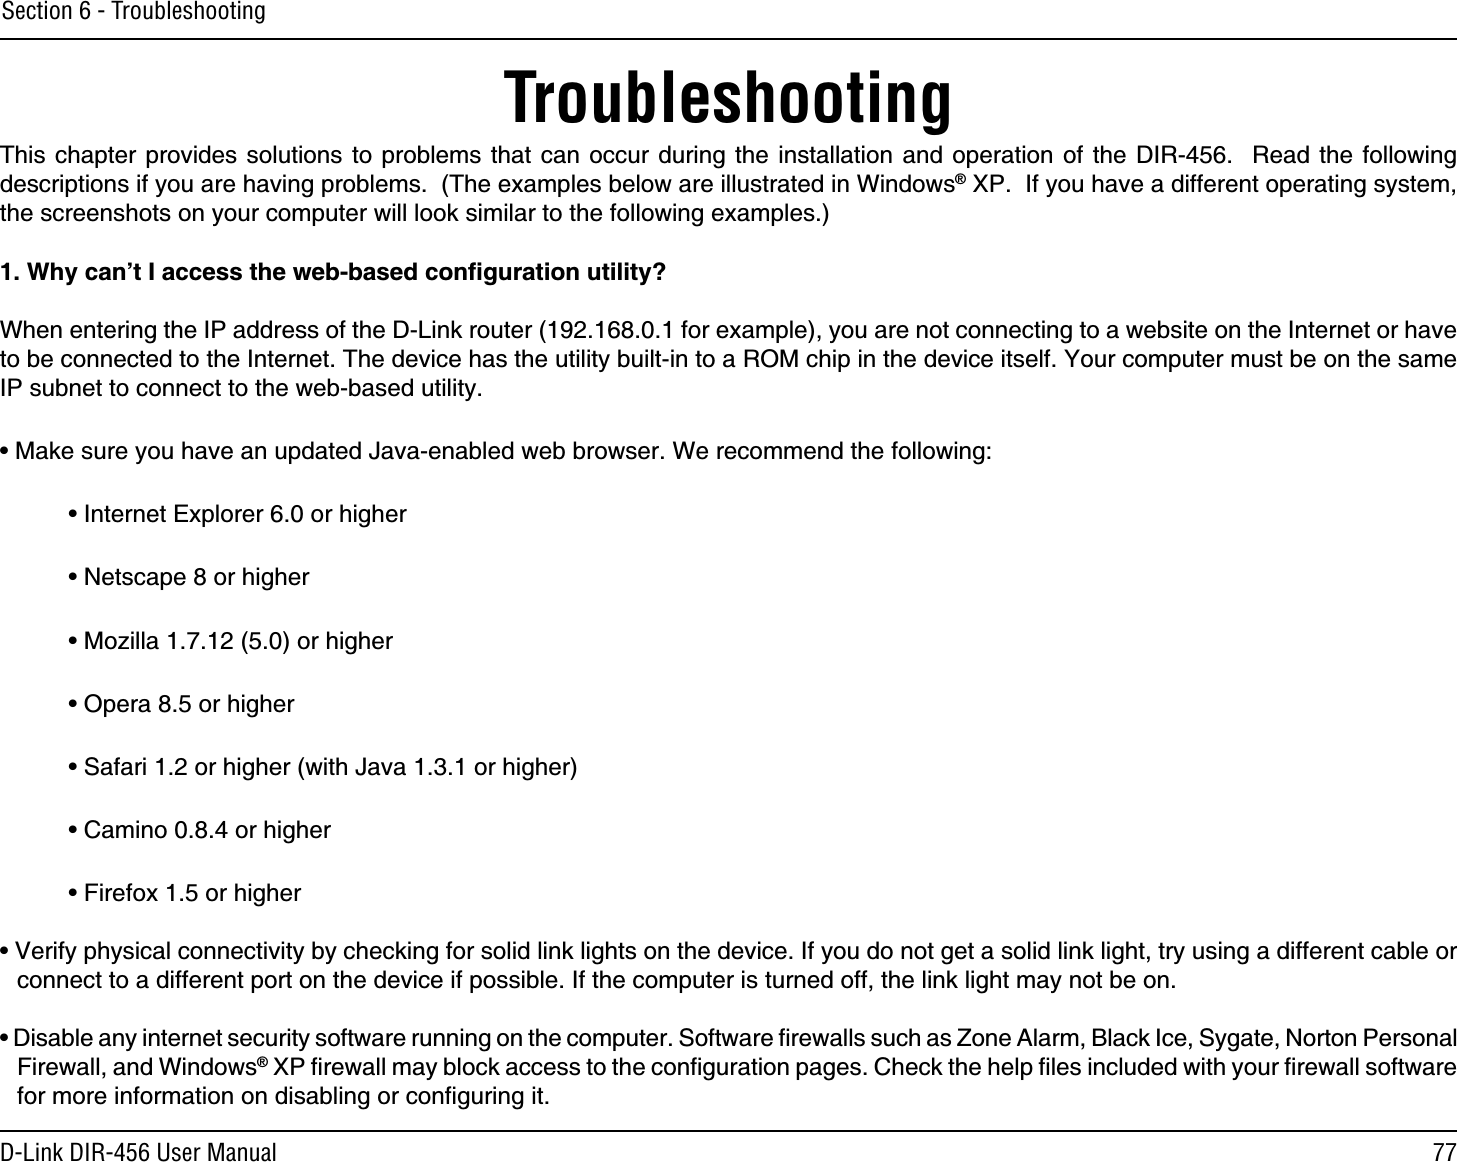 77D-Link DIR-456 User ManualSection 6 - TroubleshootingTroubleshootingThis chapter provides solutions to problems that can occur during the installation and operation of the DIR-456.  Read the following descriptions if you are having problems.  (The examples below are illustrated in Windows® XP.  If you have a different operating system, the screenshots on your computer will look similar to the following examples.)1. Why can’t I access the web-based conﬁguration utility?When entering the IP address of the D-Link router (192.168.0.1 for example), you are not connecting to a website on the Internet or have to be connected to the Internet. The device has the utility built-in to a ROM chip in the device itself. Your computer must be on the same IP subnet to connect to the web-based utility. • Make sure you have an updated Java-enabled web browser. We recommend the following: • Internet Explorer 6.0 or higher • Netscape 8 or higher • Mozilla 1.7.12 (5.0) or higher • Opera 8.5 or higher • Safari 1.2 or higher (with Java 1.3.1 or higher) • Camino 0.8.4 or higher • Firefox 1.5 or higher • Verify physical connectivity by checking for solid link lights on the device. If you do not get a solid link light, try using a different cable or connect to a different port on the device if possible. If the computer is turned off, the link light may not be on.• Disable any internet security software running on the computer. Software ﬁrewalls such as Zone Alarm, Black Ice, Sygate, Norton Personal Firewall, and Windows® XP ﬁrewall may block access to the conﬁguration pages. Check the help ﬁles included with your ﬁrewall software for more information on disabling or conﬁguring it.